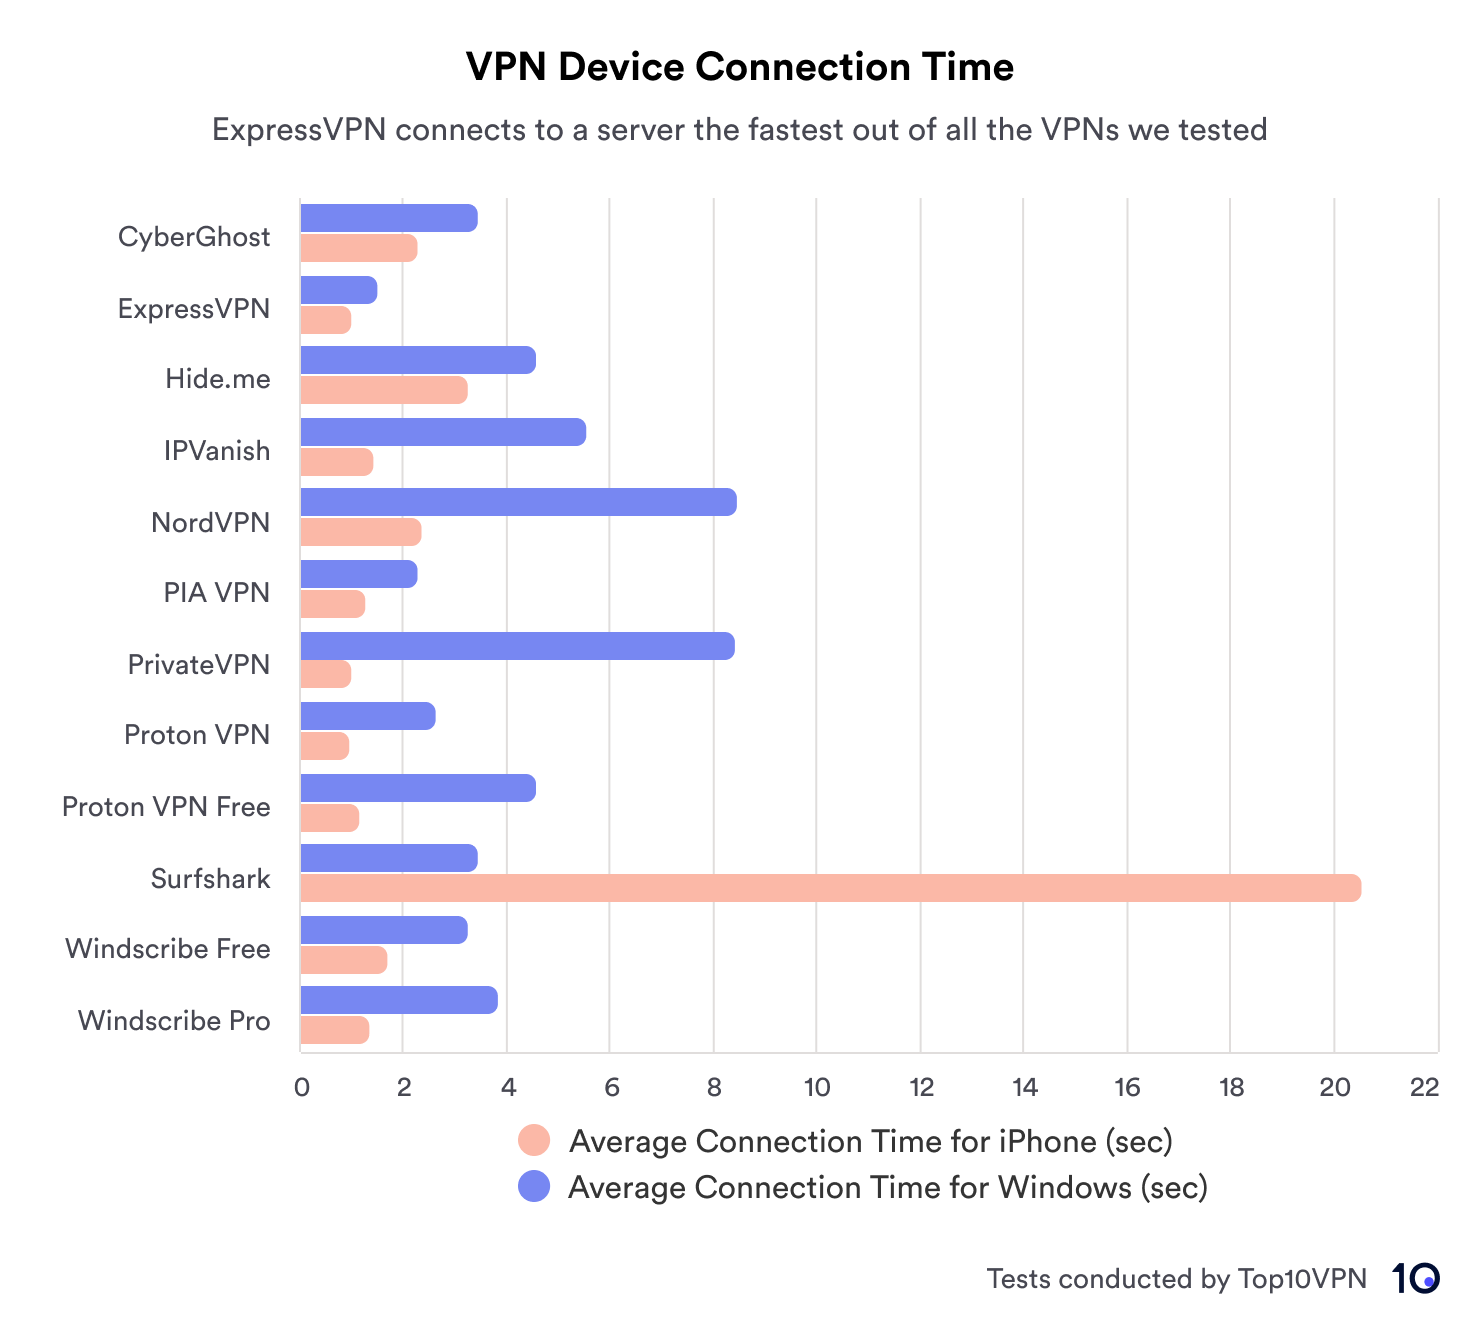 Bar chart comparing connection time between VPNs.